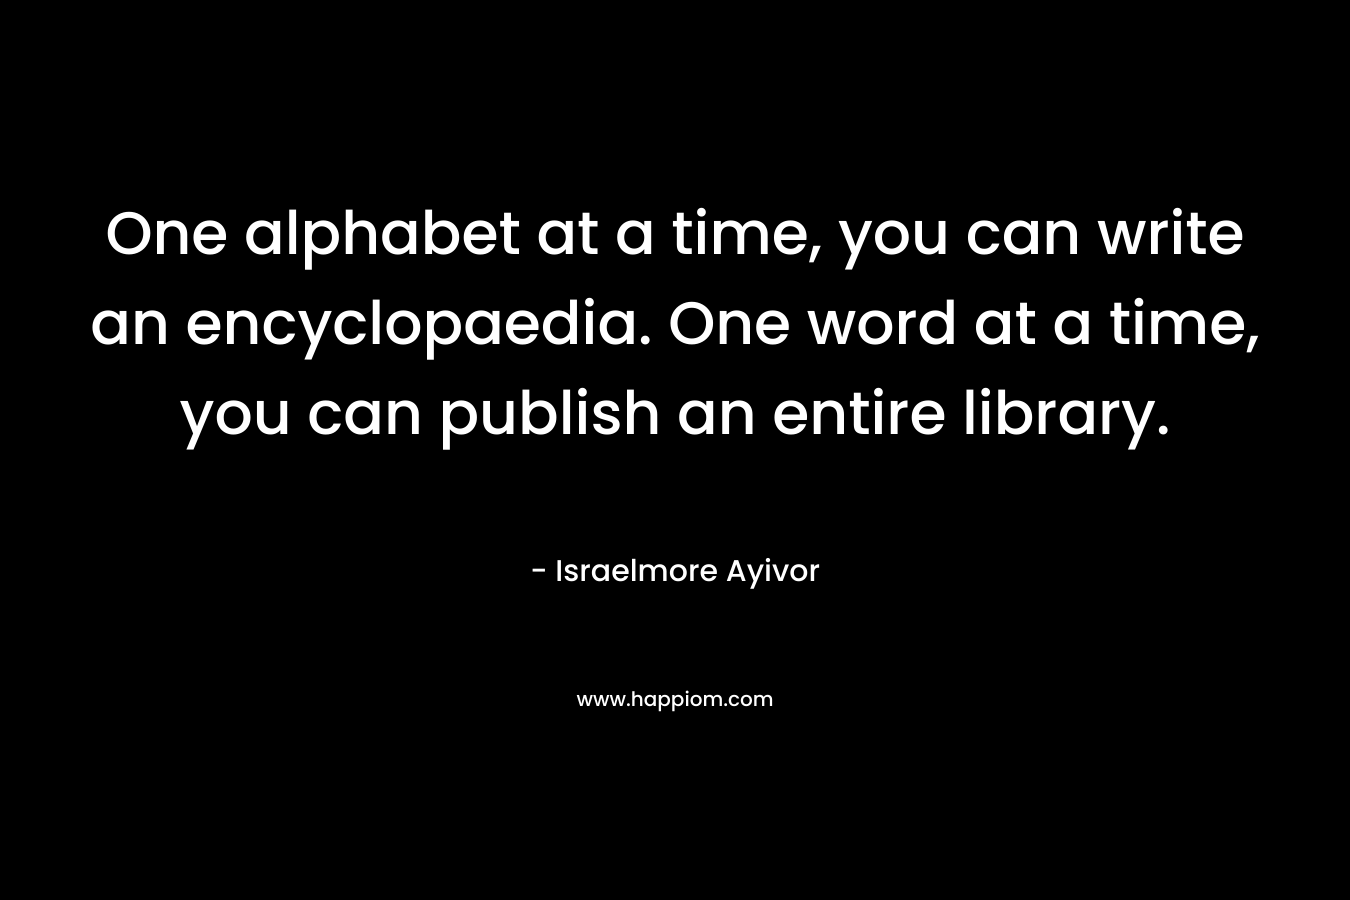 One alphabet at a time, you can write an encyclopaedia. One word at a time, you can publish an entire library.